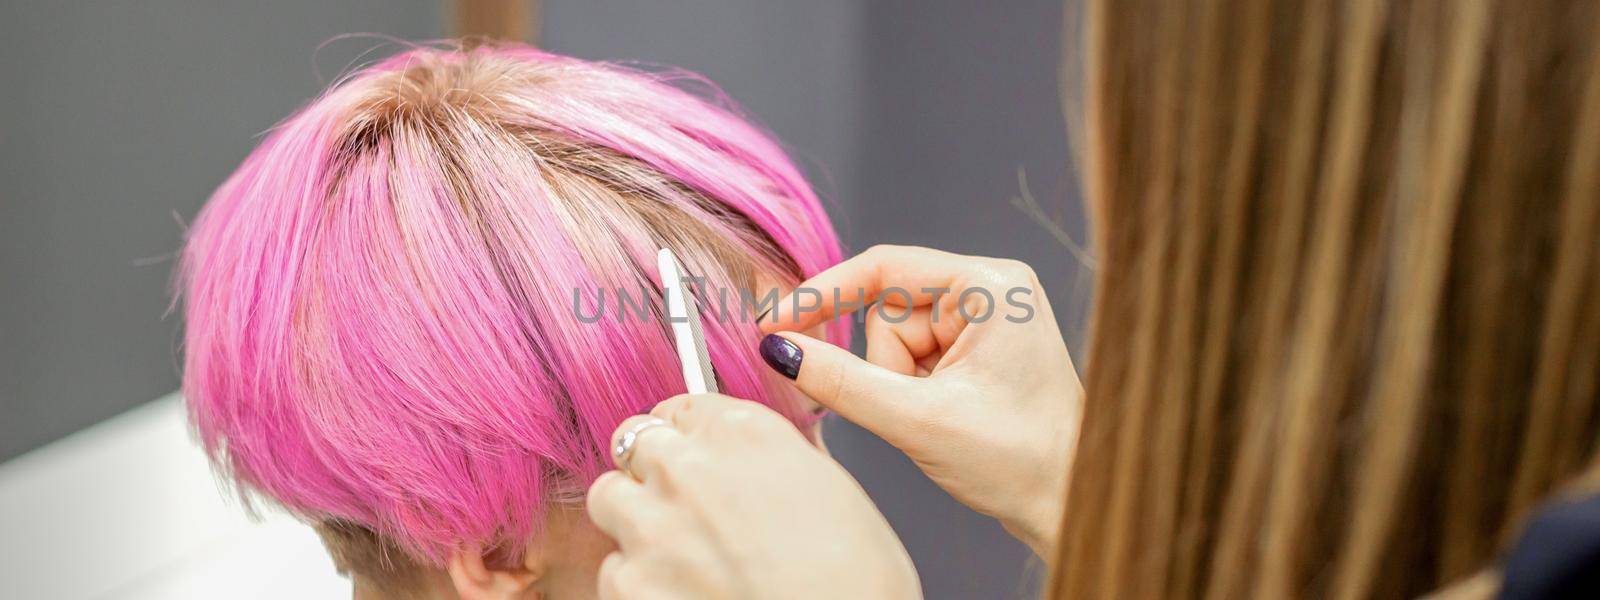 Hairdresser prepares dyed short pink hair of a young woman to procedures in a beauty salon. by okskukuruza